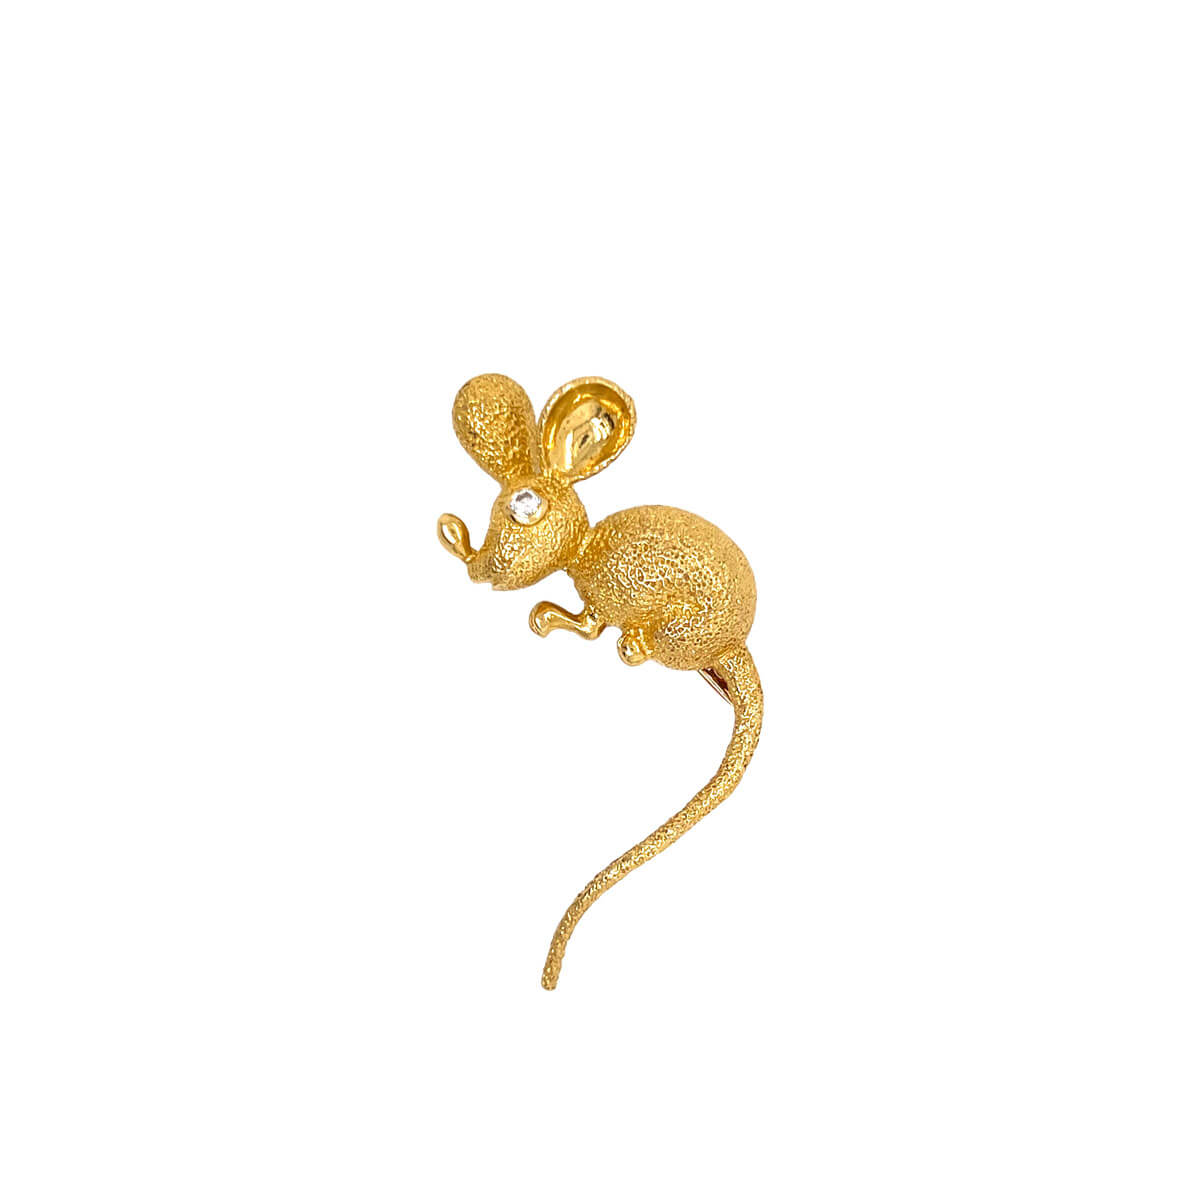 18ct Yellow Gold Mouse Shaped Brooch